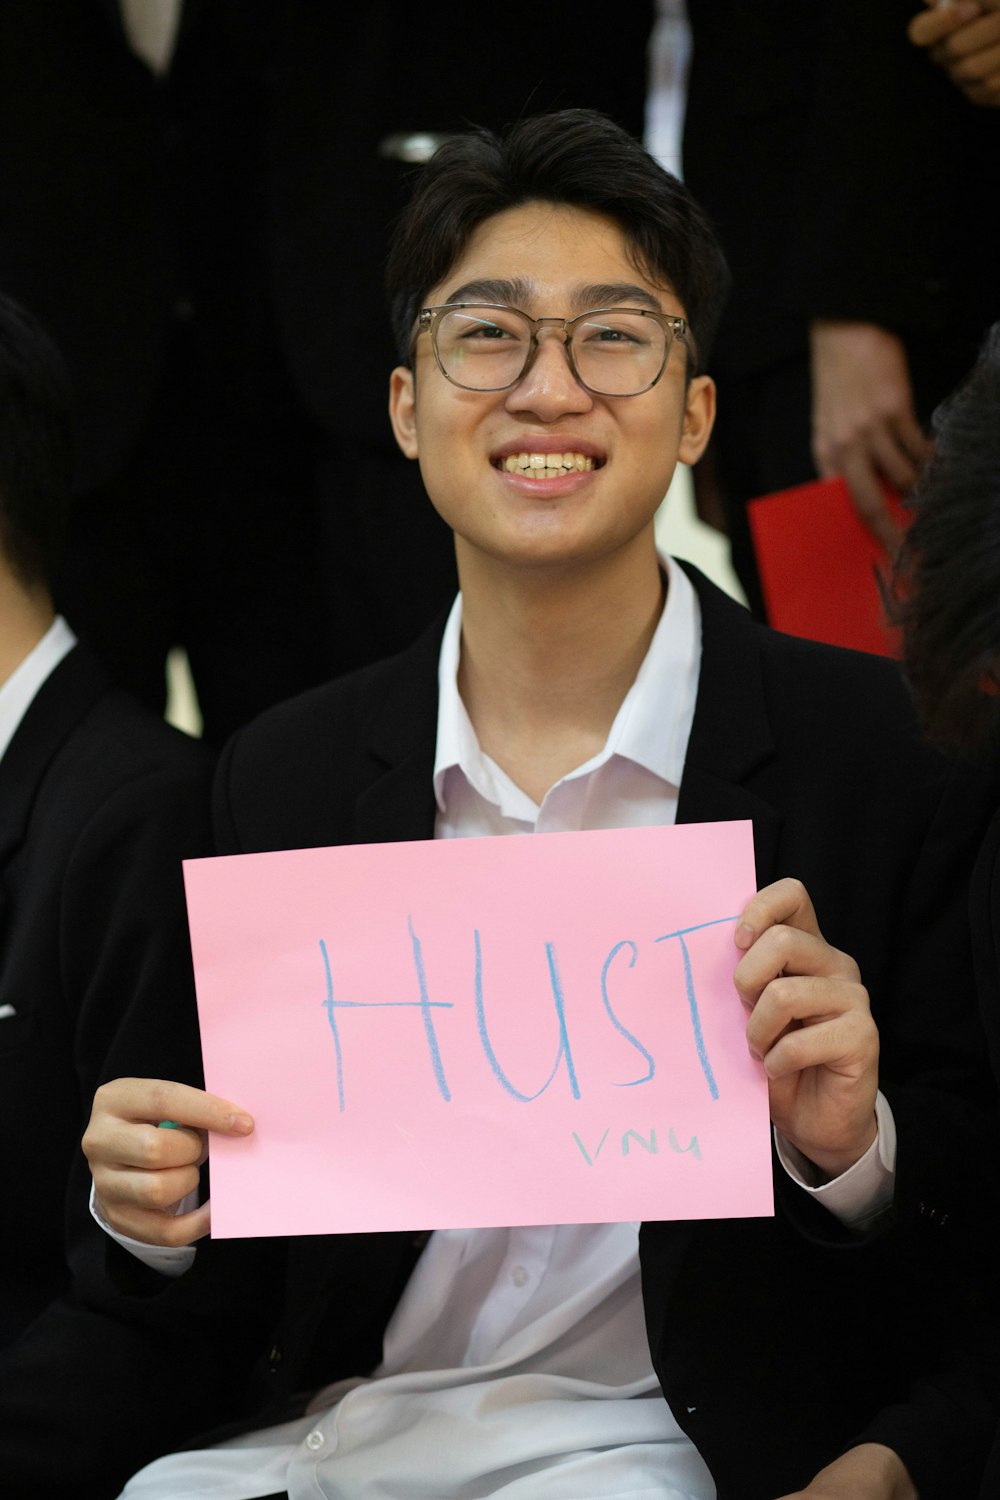 a young man holding a sign that says hush